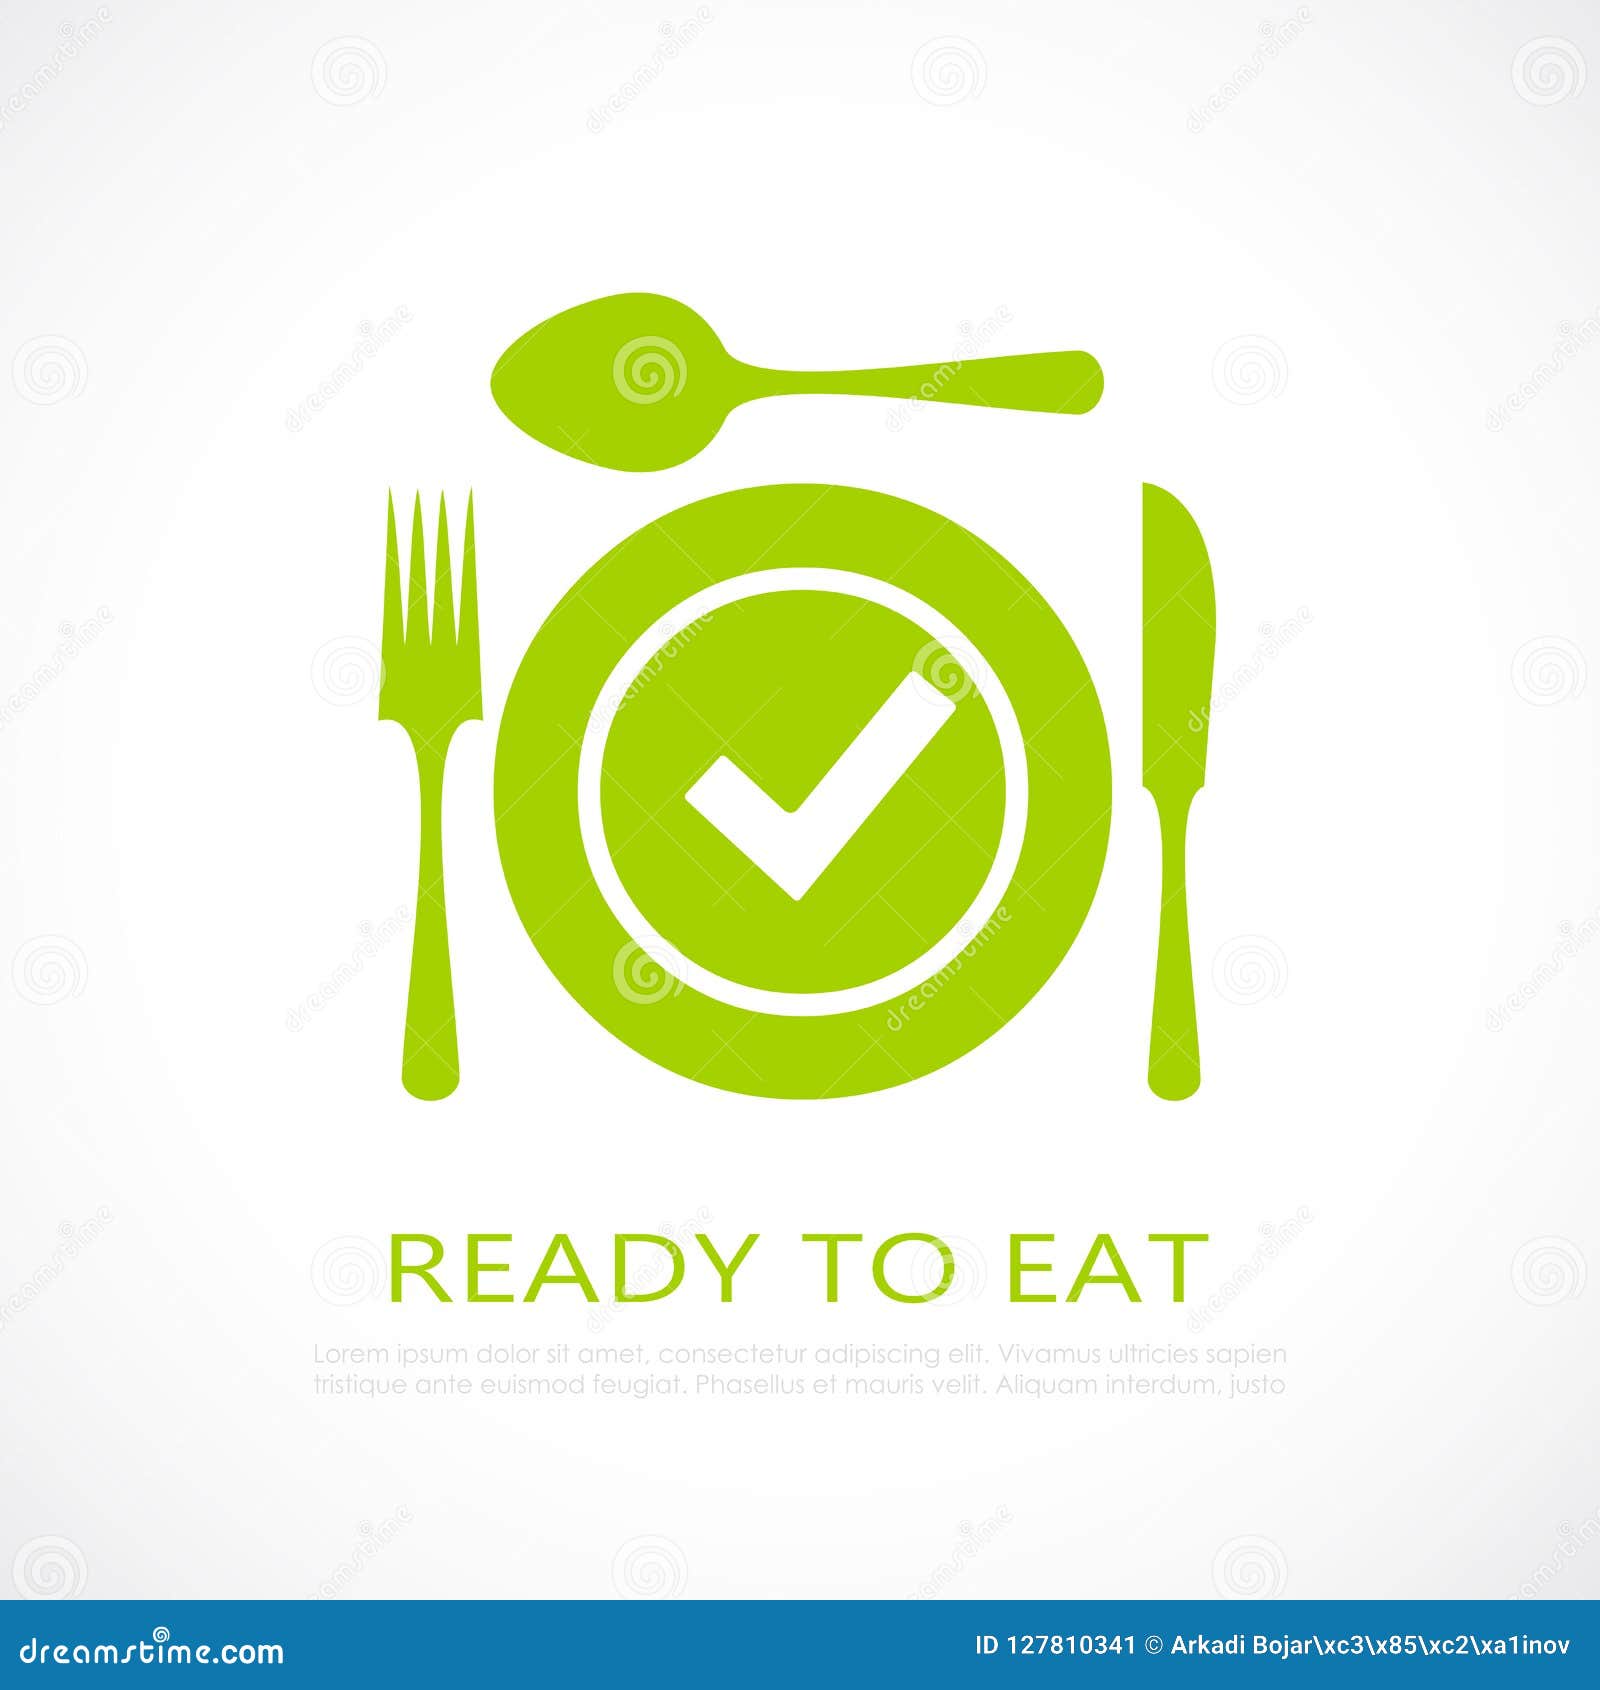 Ready To Eat Food Icon Stock Vector Illustration Of Dietary